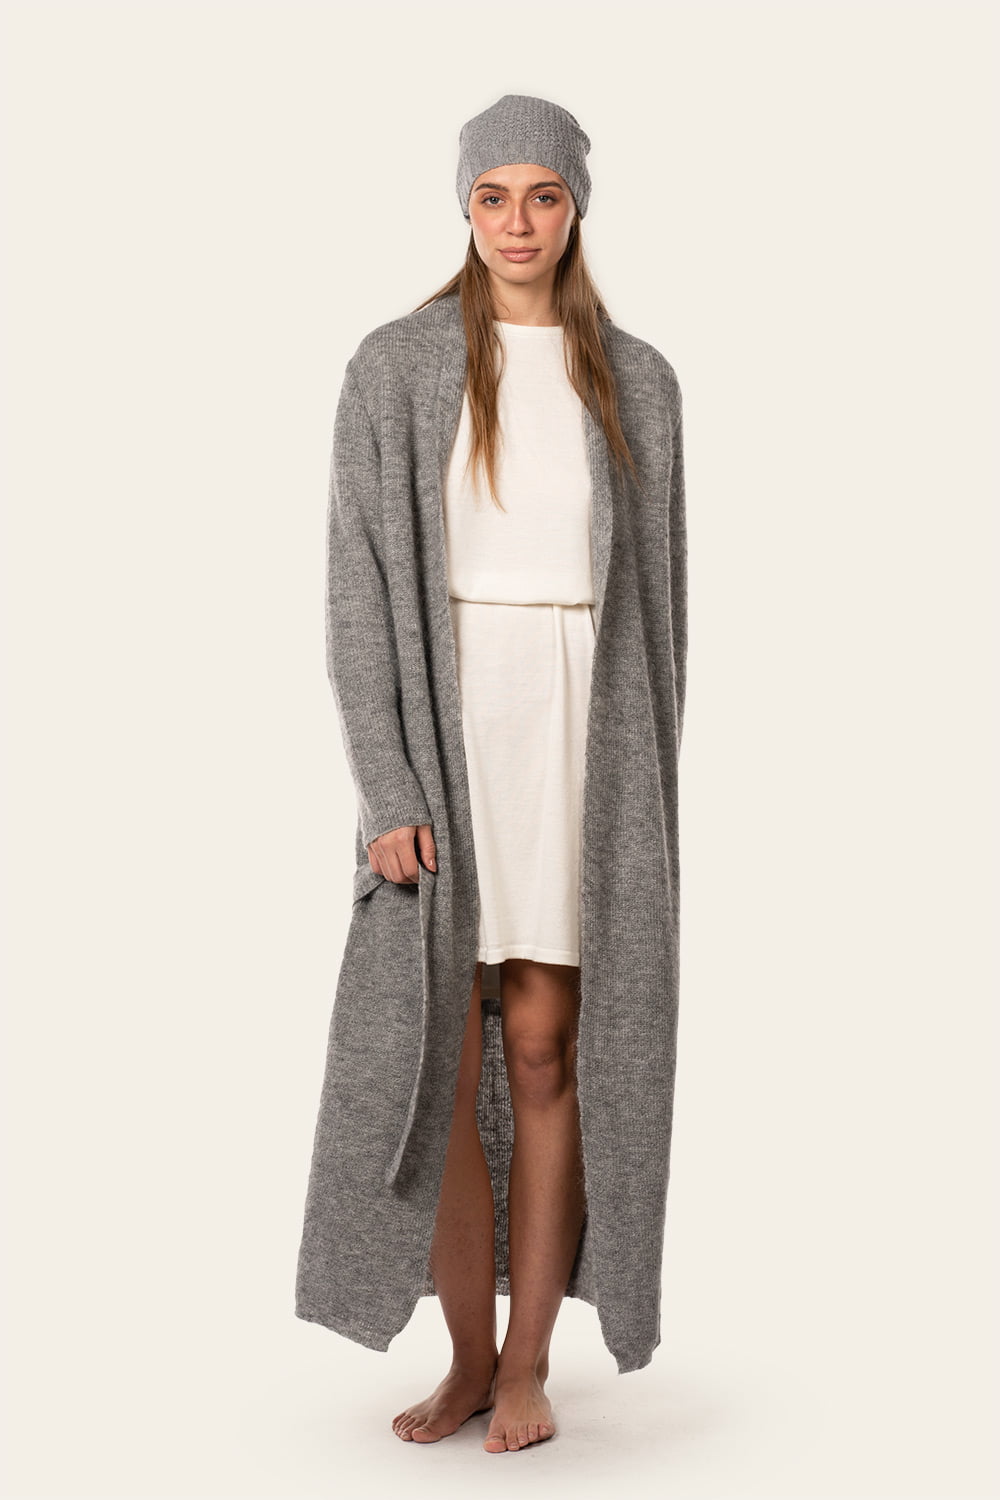 Long gray cardigan with off-white dress